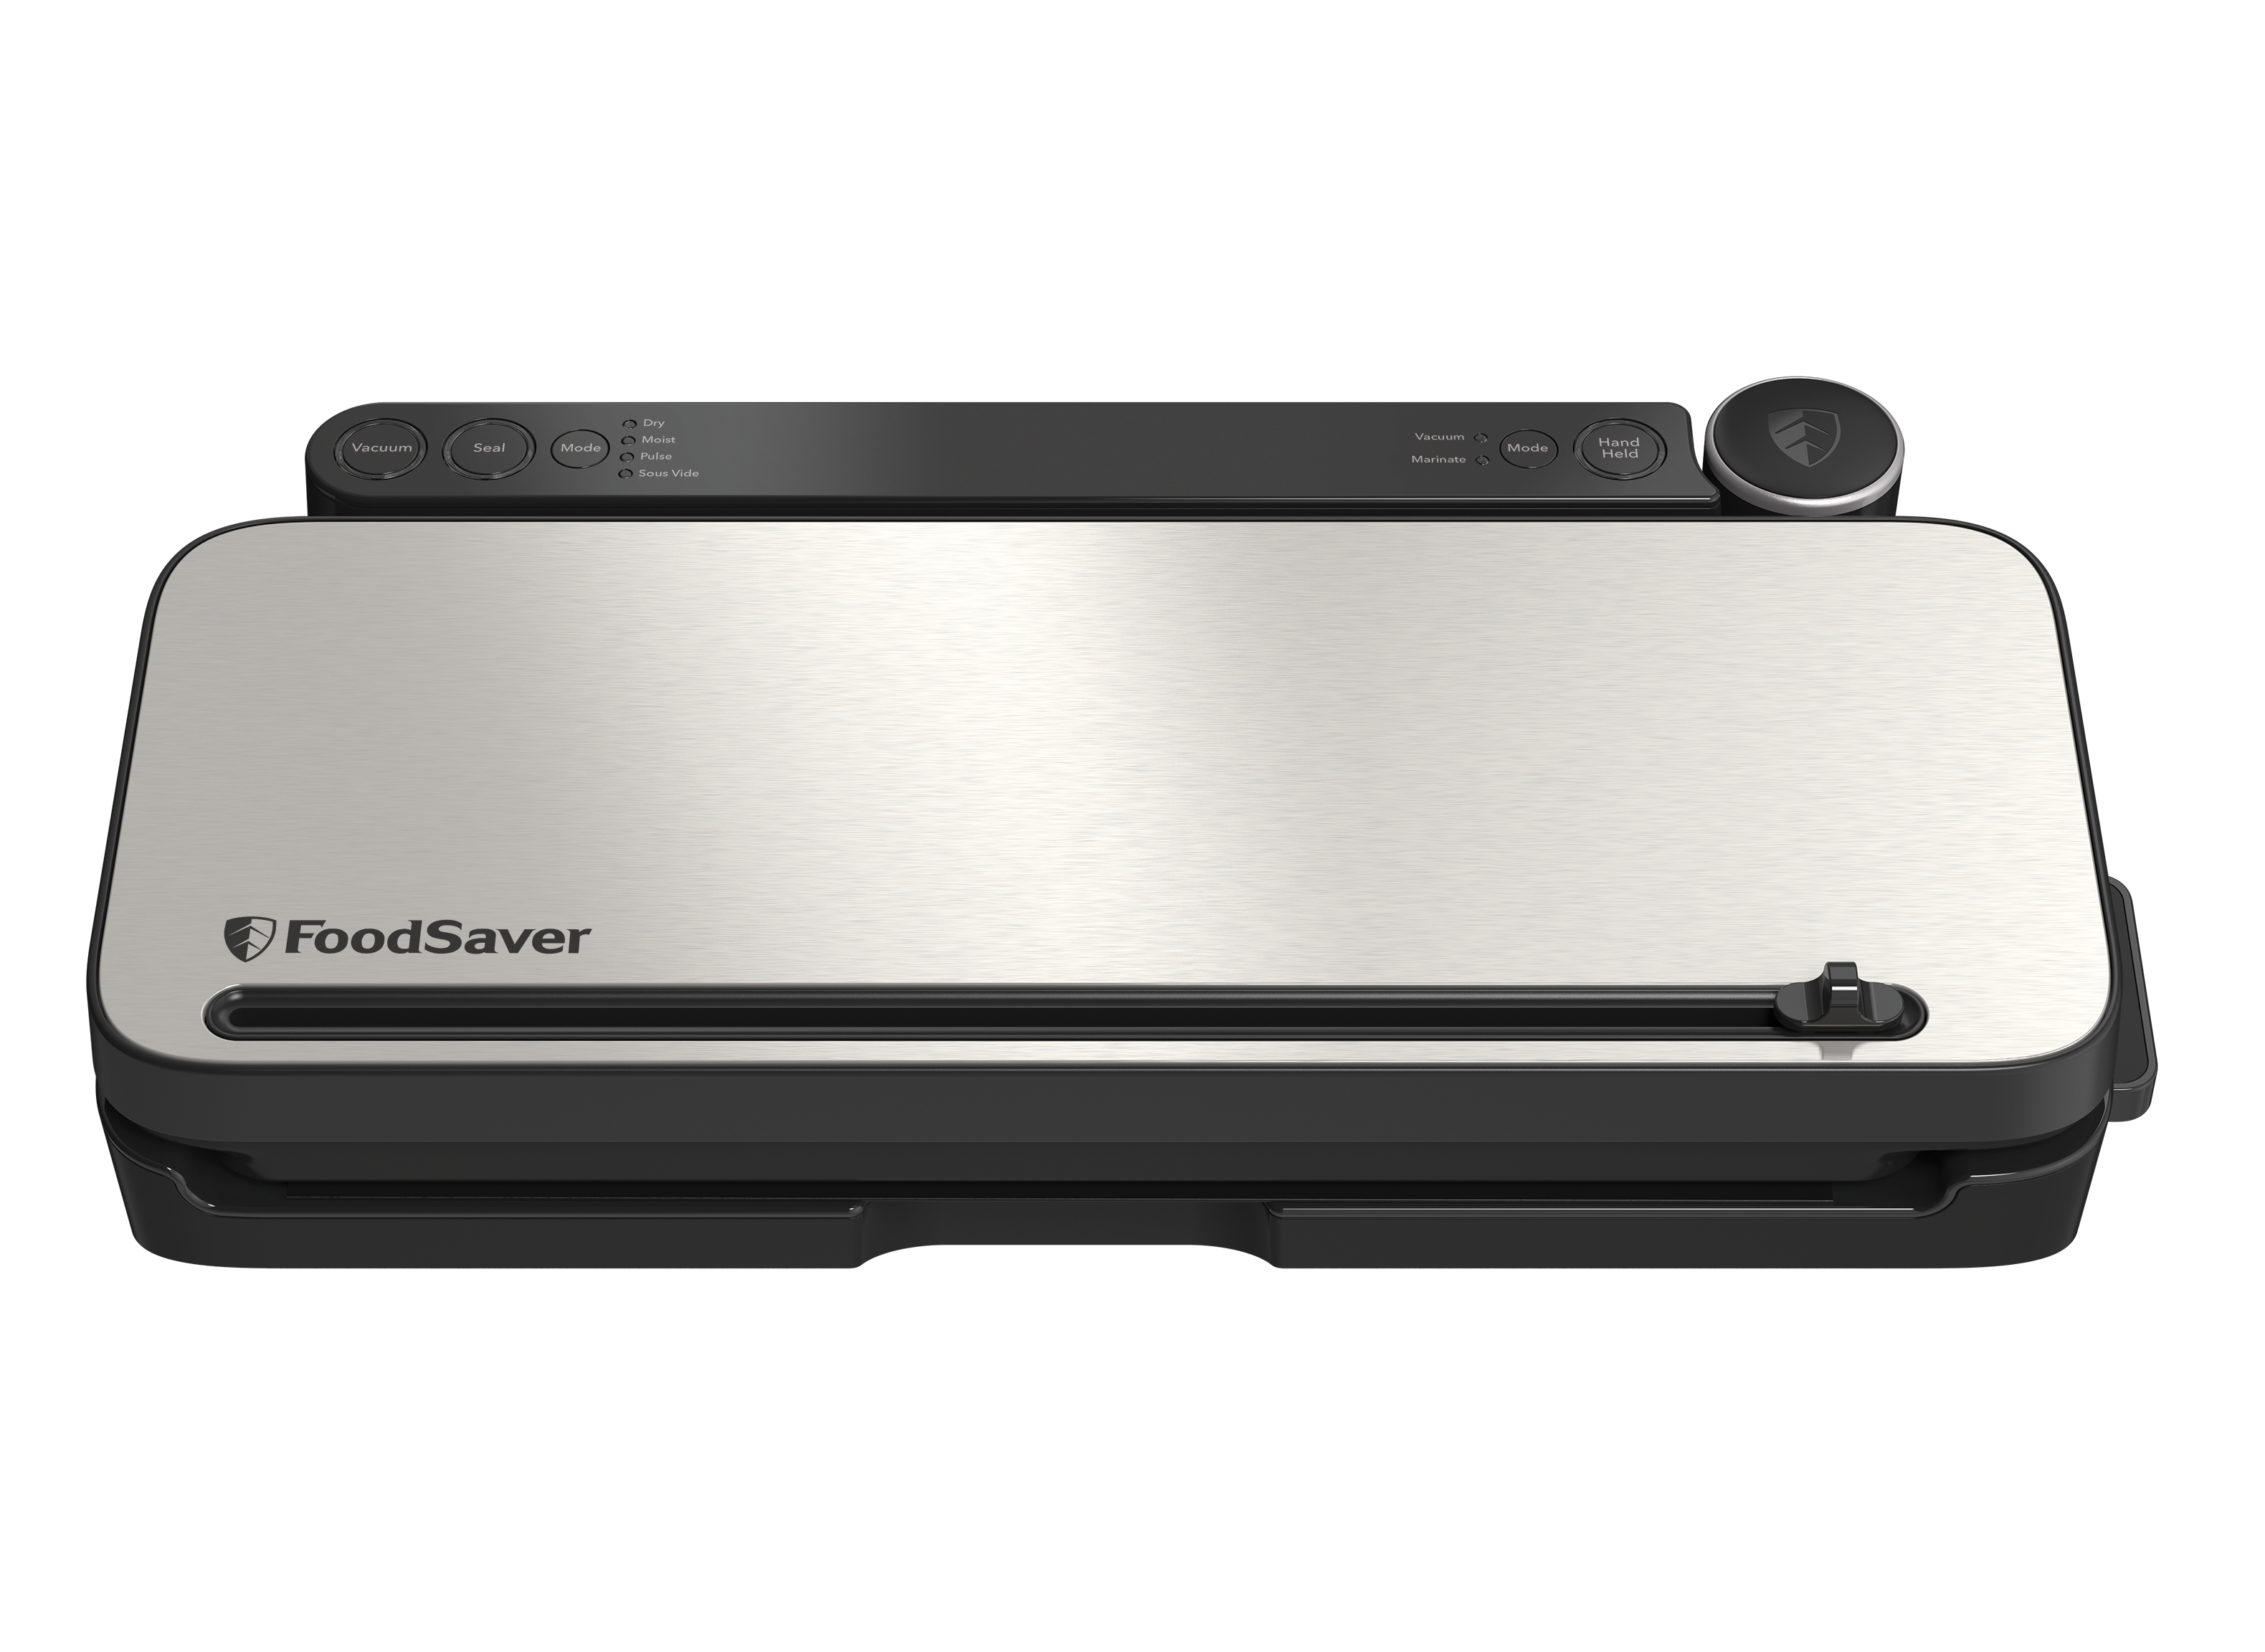 https://crdms.images.consumerreports.org/prod/products/cr/models/402840-vacuum-sealers-foodsaver-vs-3180-multi-use-10017562.png